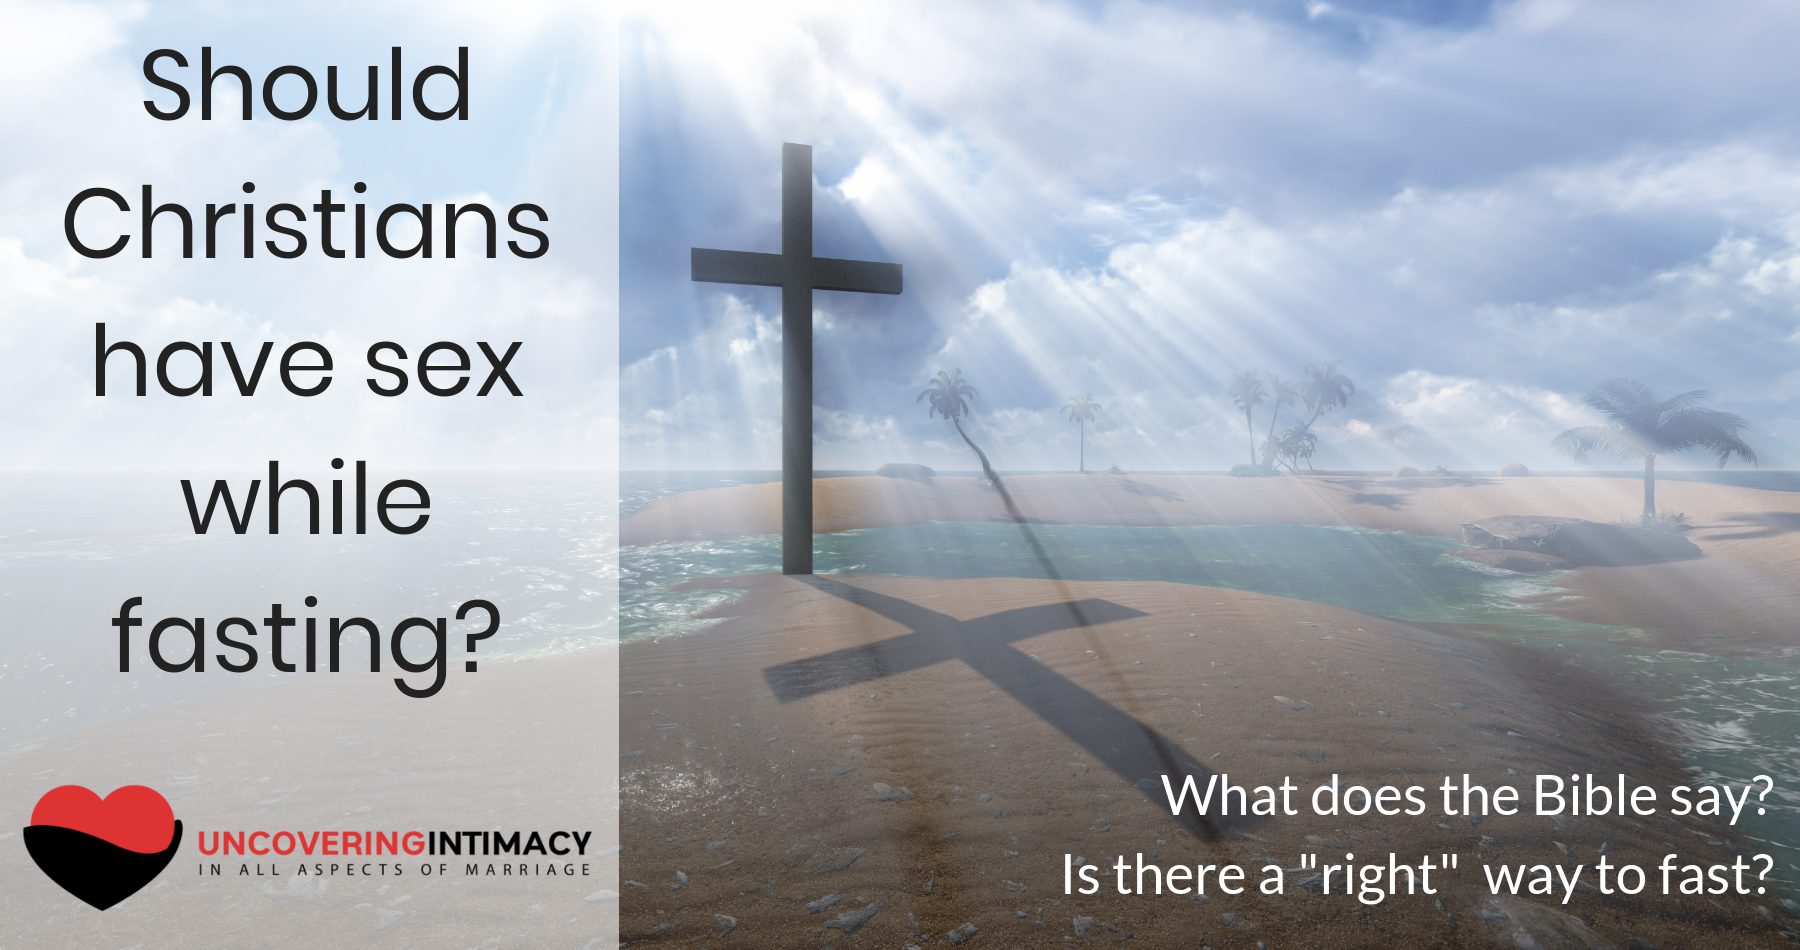 Should Christians have sex while fasting?